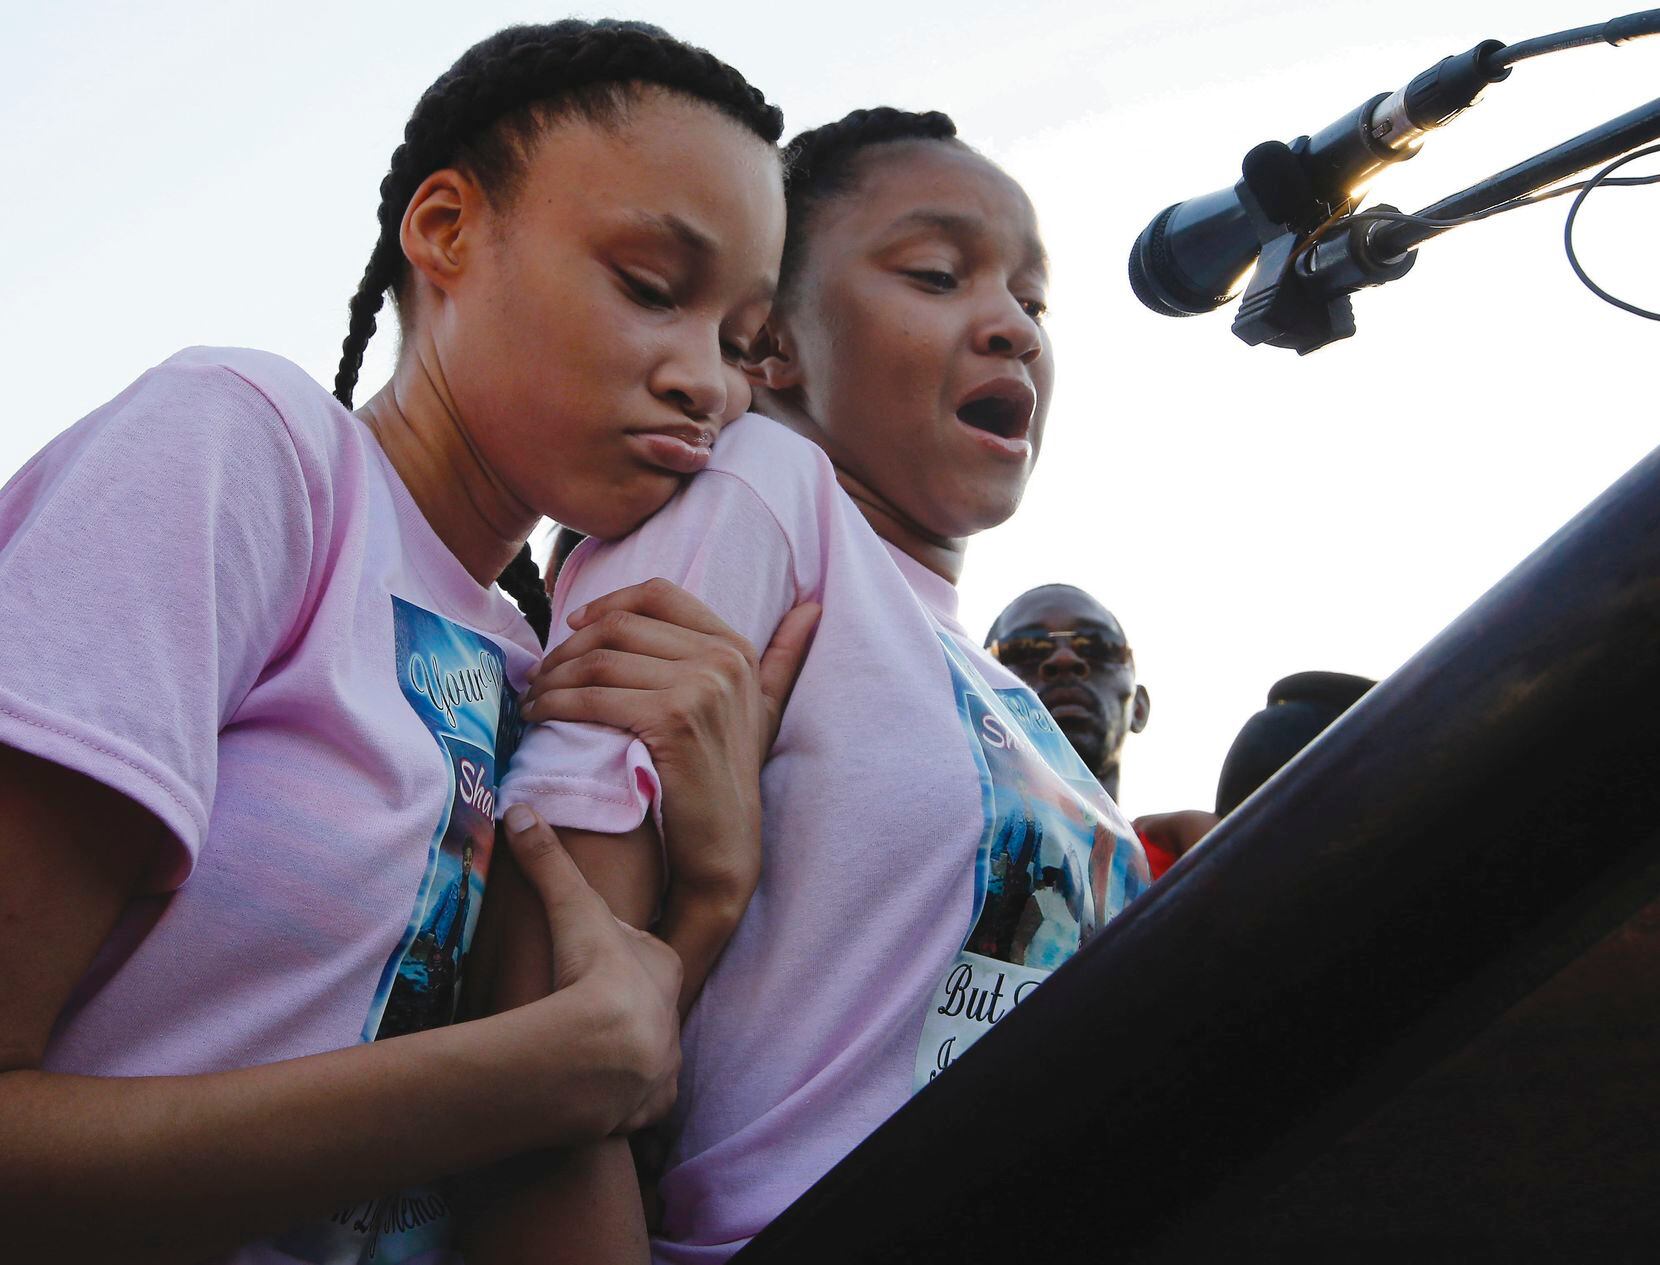 Kayla Randle (right), 14, with Shiniece Richards, 16, speaks during a vigil July 3 for their sister Shavon Randle, 13, who was killed and her body left in an abandoned East Oak Cliff home. The Lancaster girl was kidnapped and slain over stolen drugs that she had nothing to do with, police said.